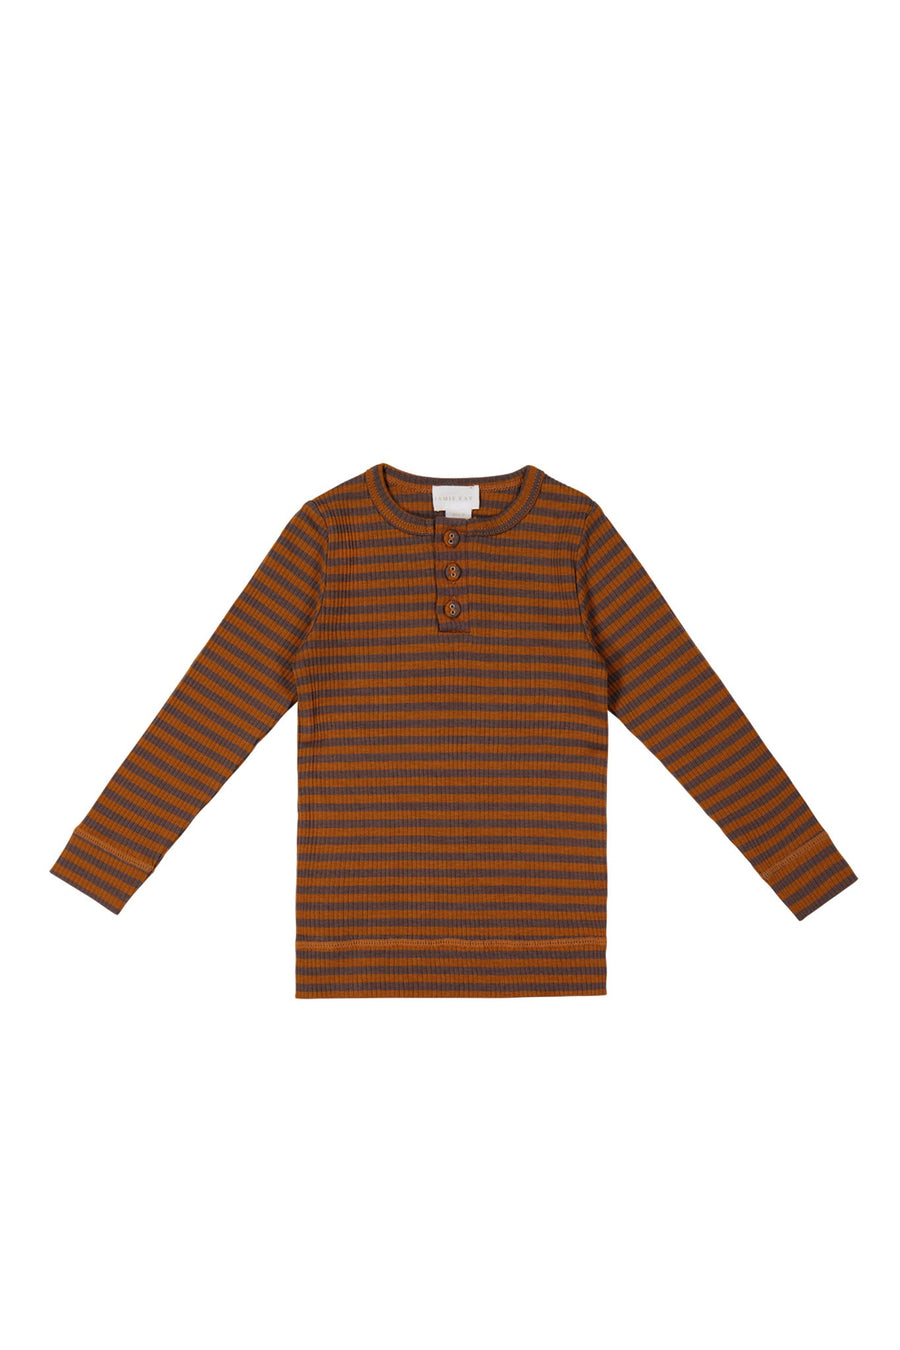 Organic Cotton Modal Long Sleeve Henley - Narrow Stripe Ginger Childrens Top from Jamie Kay USA